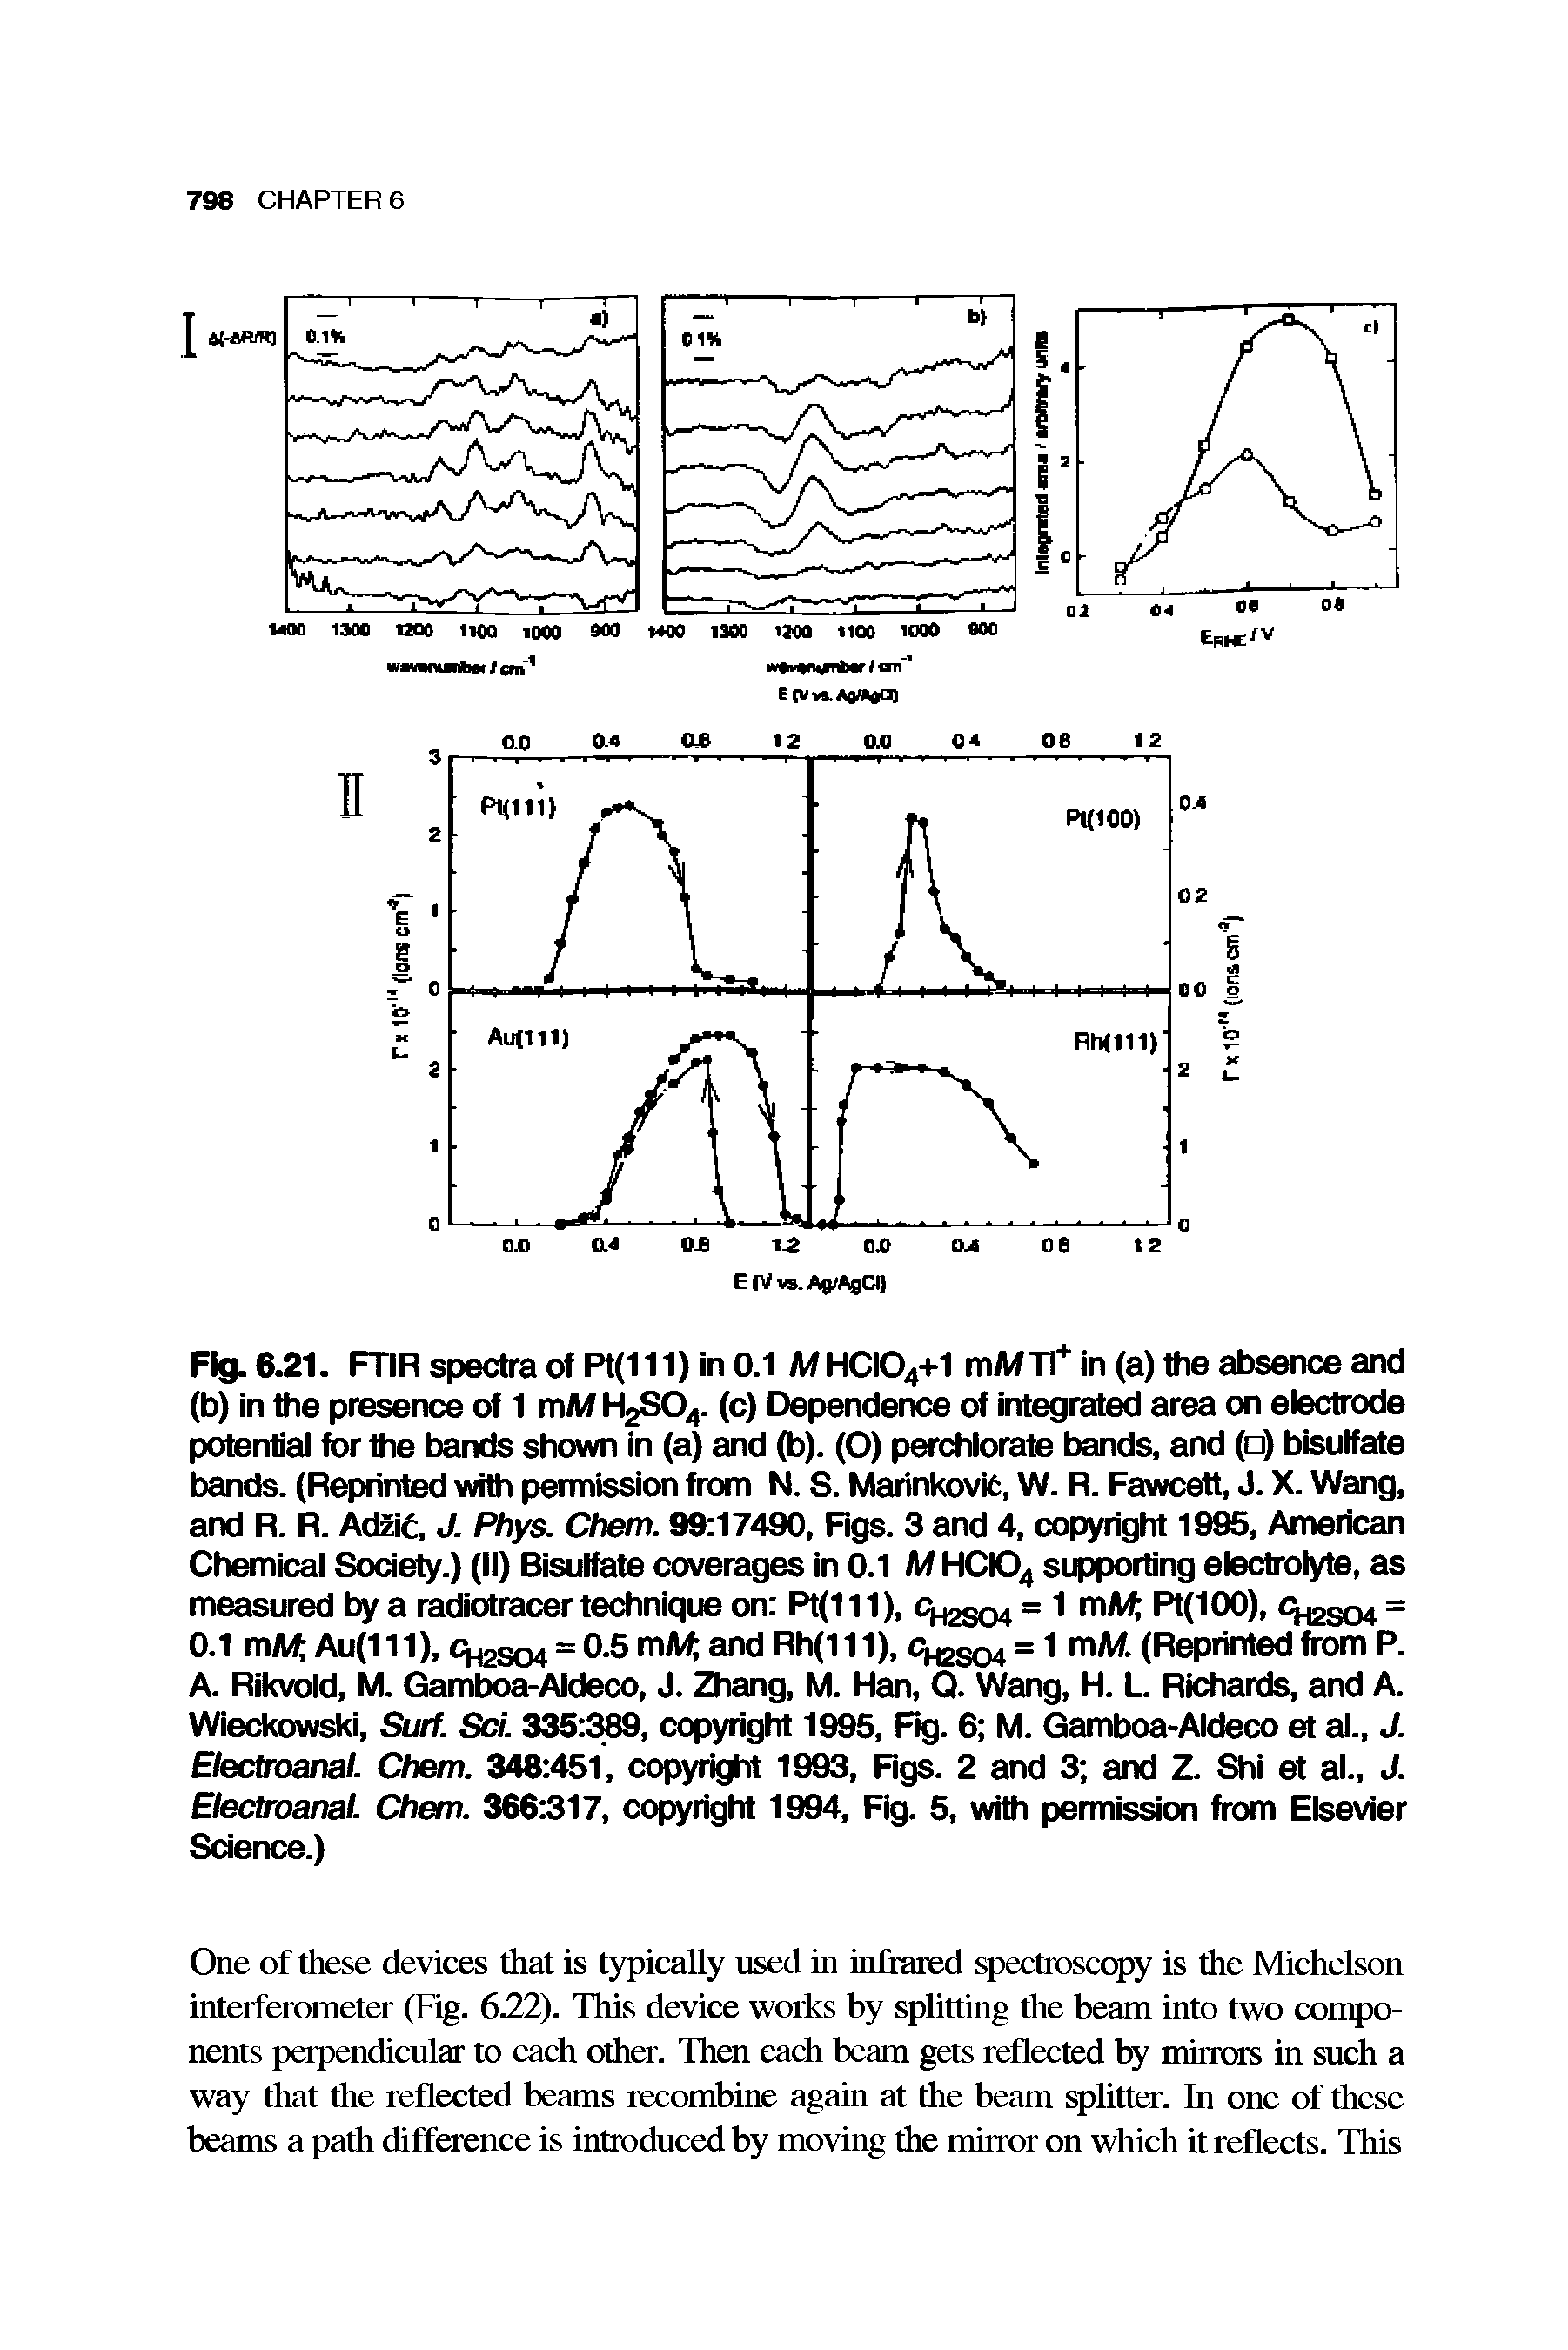 Fig. 6.21. FTIR spectra of R(111) in 0.1 M HCI04+1 mMTI+ in (a) the absence and (b) in the presence of 1 mM H2S04. (c) Dependence of integrated area on electrode potential for the bands shown in (a) and (b). (O) perchlorate bands, and ( ) bisulfate bands. (Reprinted with permission from N. S. Marinkovit, W. R. Fawcett, J. X. Wang, and R. R. Adzid, J. Phys. Chem. 99 17490, Figs. 3 and 4, copyright 1995, American Chemical Society.) (II) Bisulfate coverages in 0.1 M HCI04 supporting electrolyte, as measured by a radiotracer technique on Pt(111), cH2S04 = 1 mA Pt(100), =...